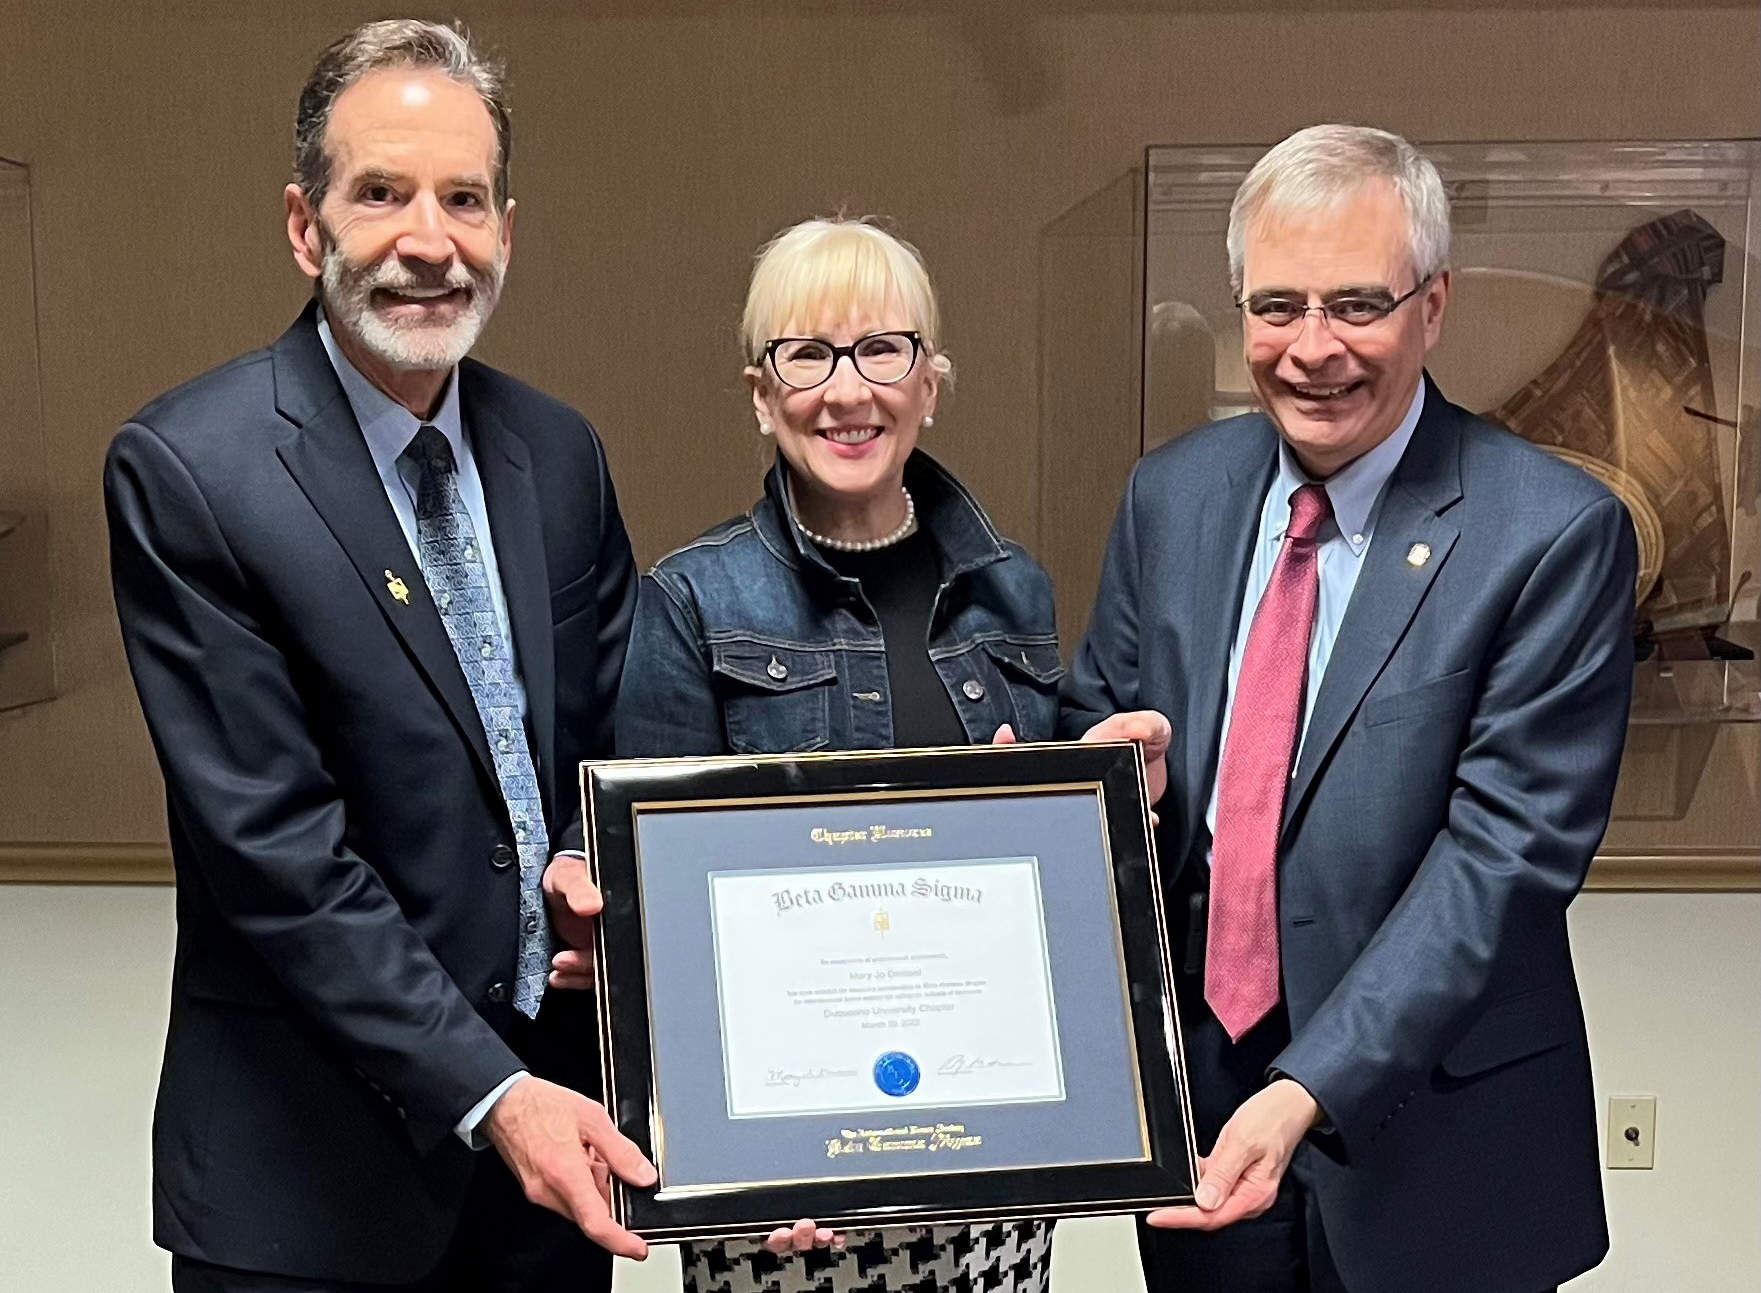 The Honoree Certificate is presented to Mary Jo Dressel (center) by Chapter President Bill Spangler (left) and Chapter Secretary- Treasurer Bob Kollar (right)..